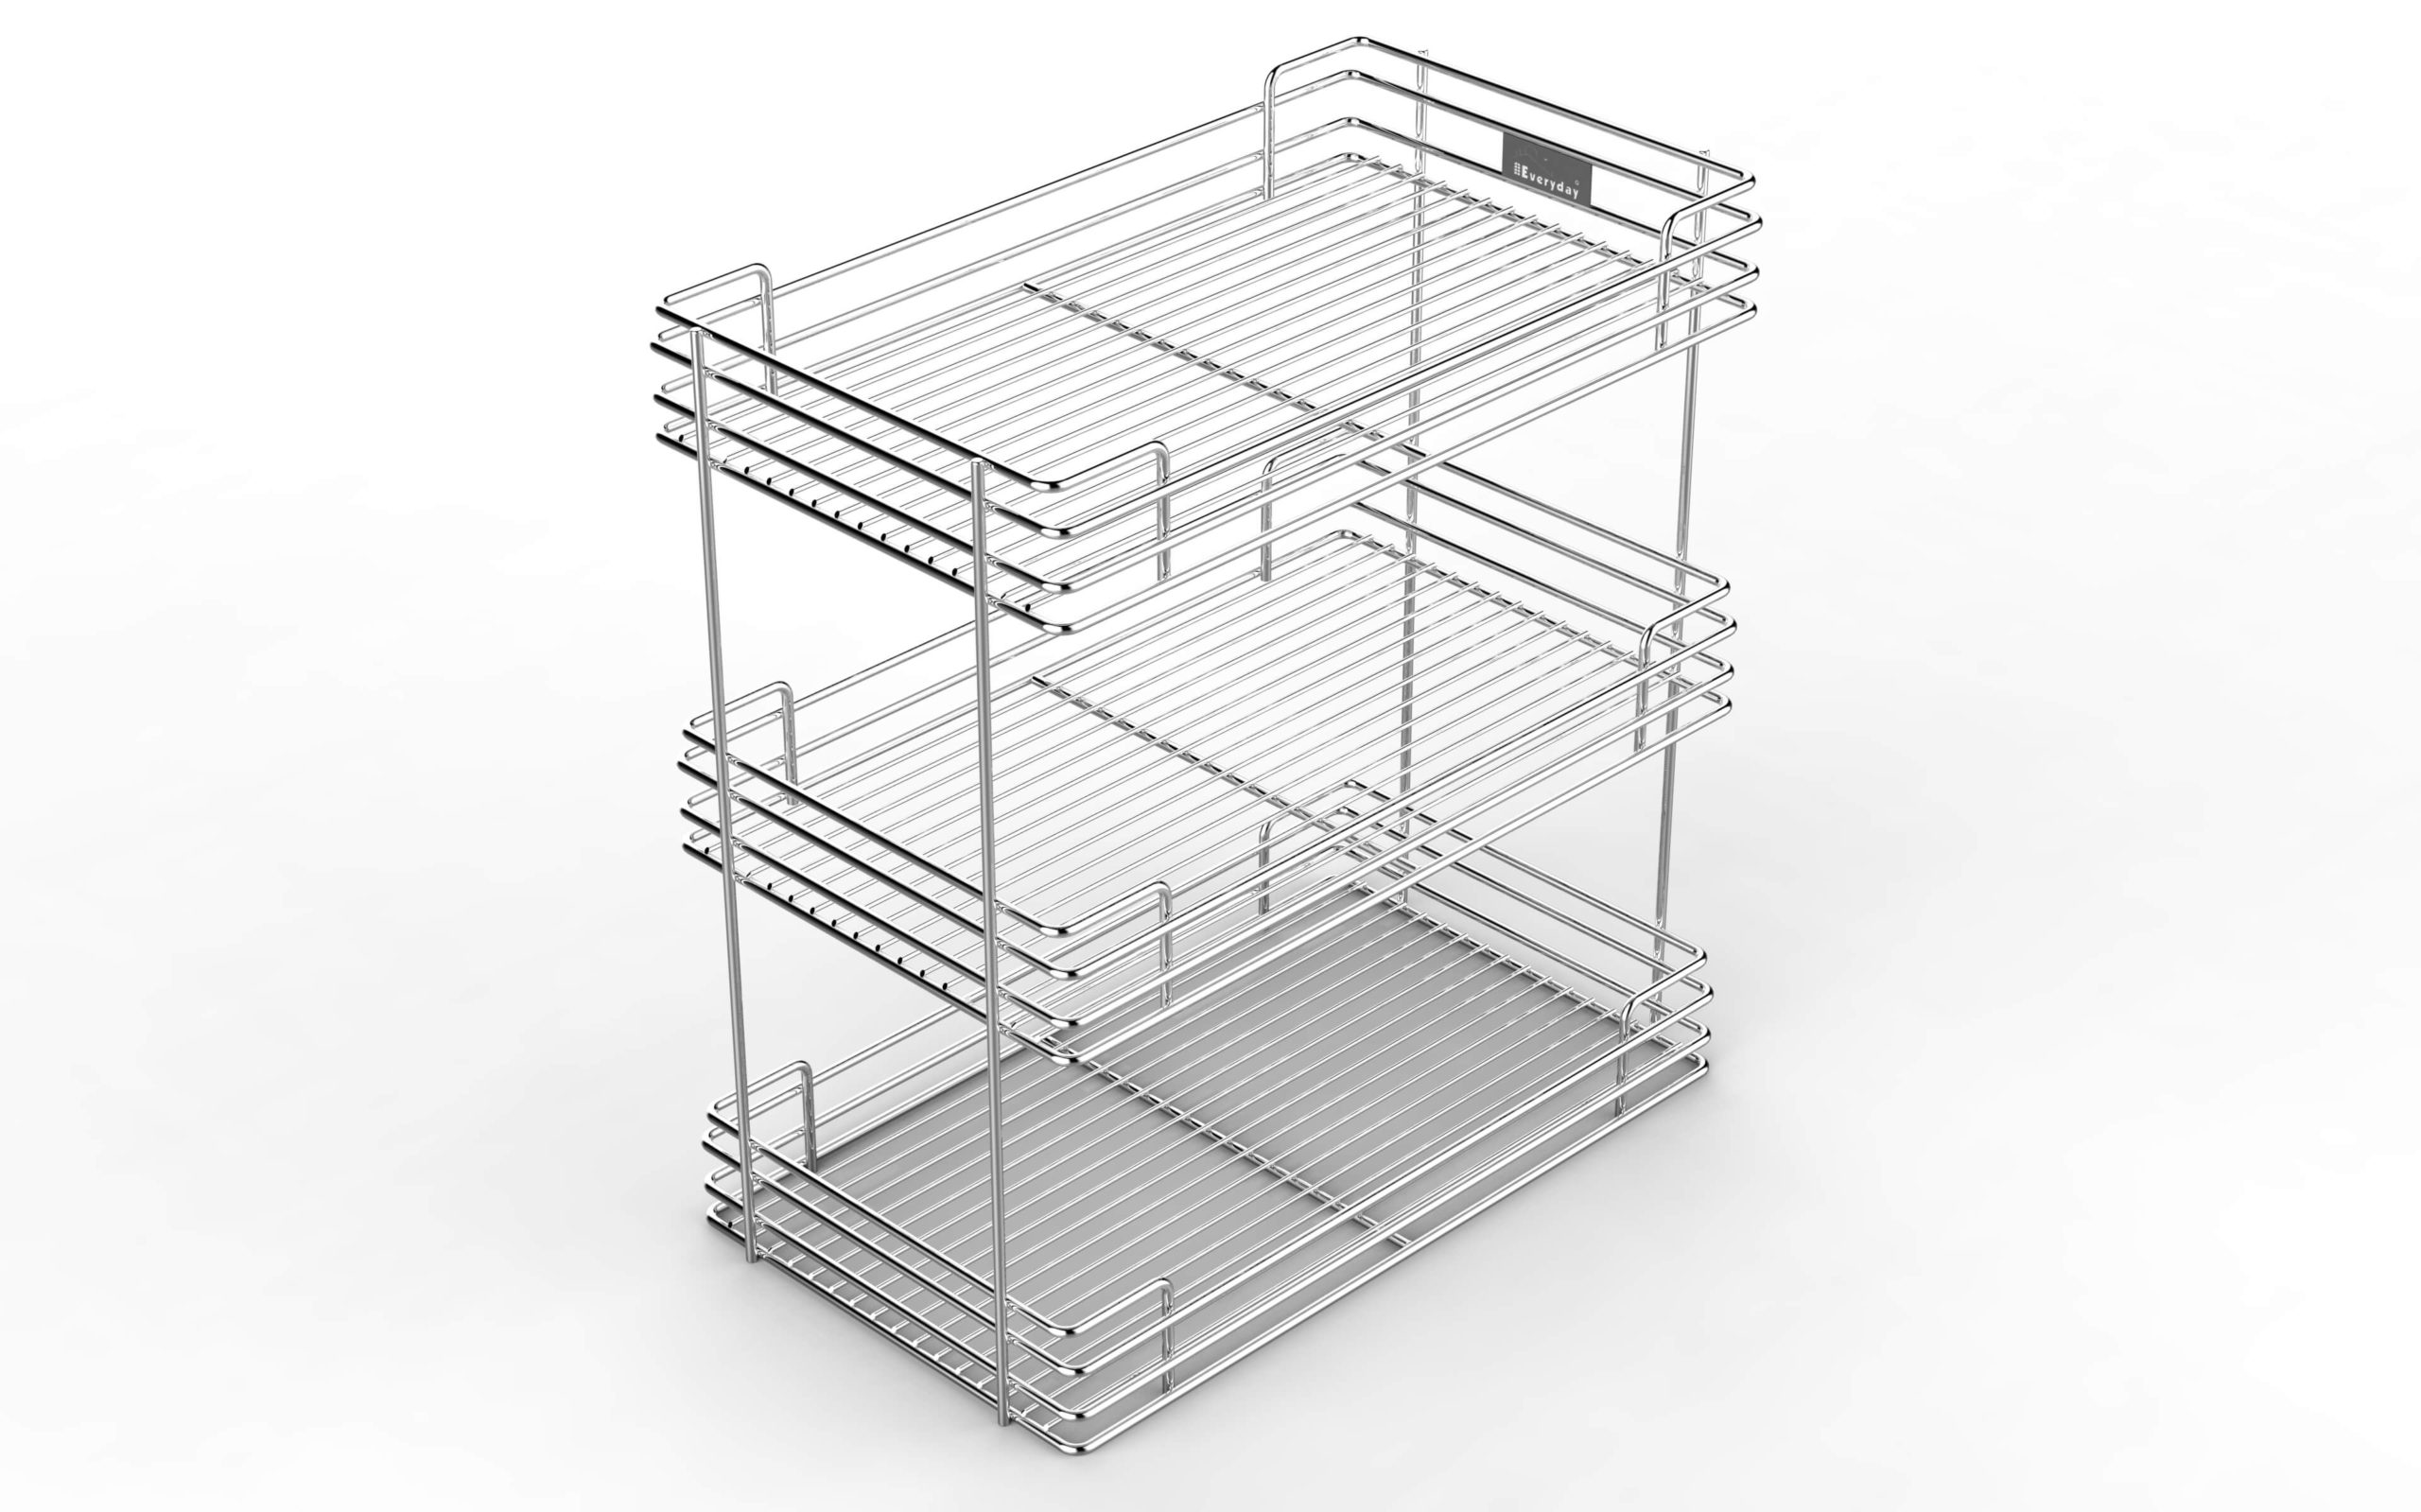 Double & Triple Pull Out Kitchen Basket - Spitze By Everyday